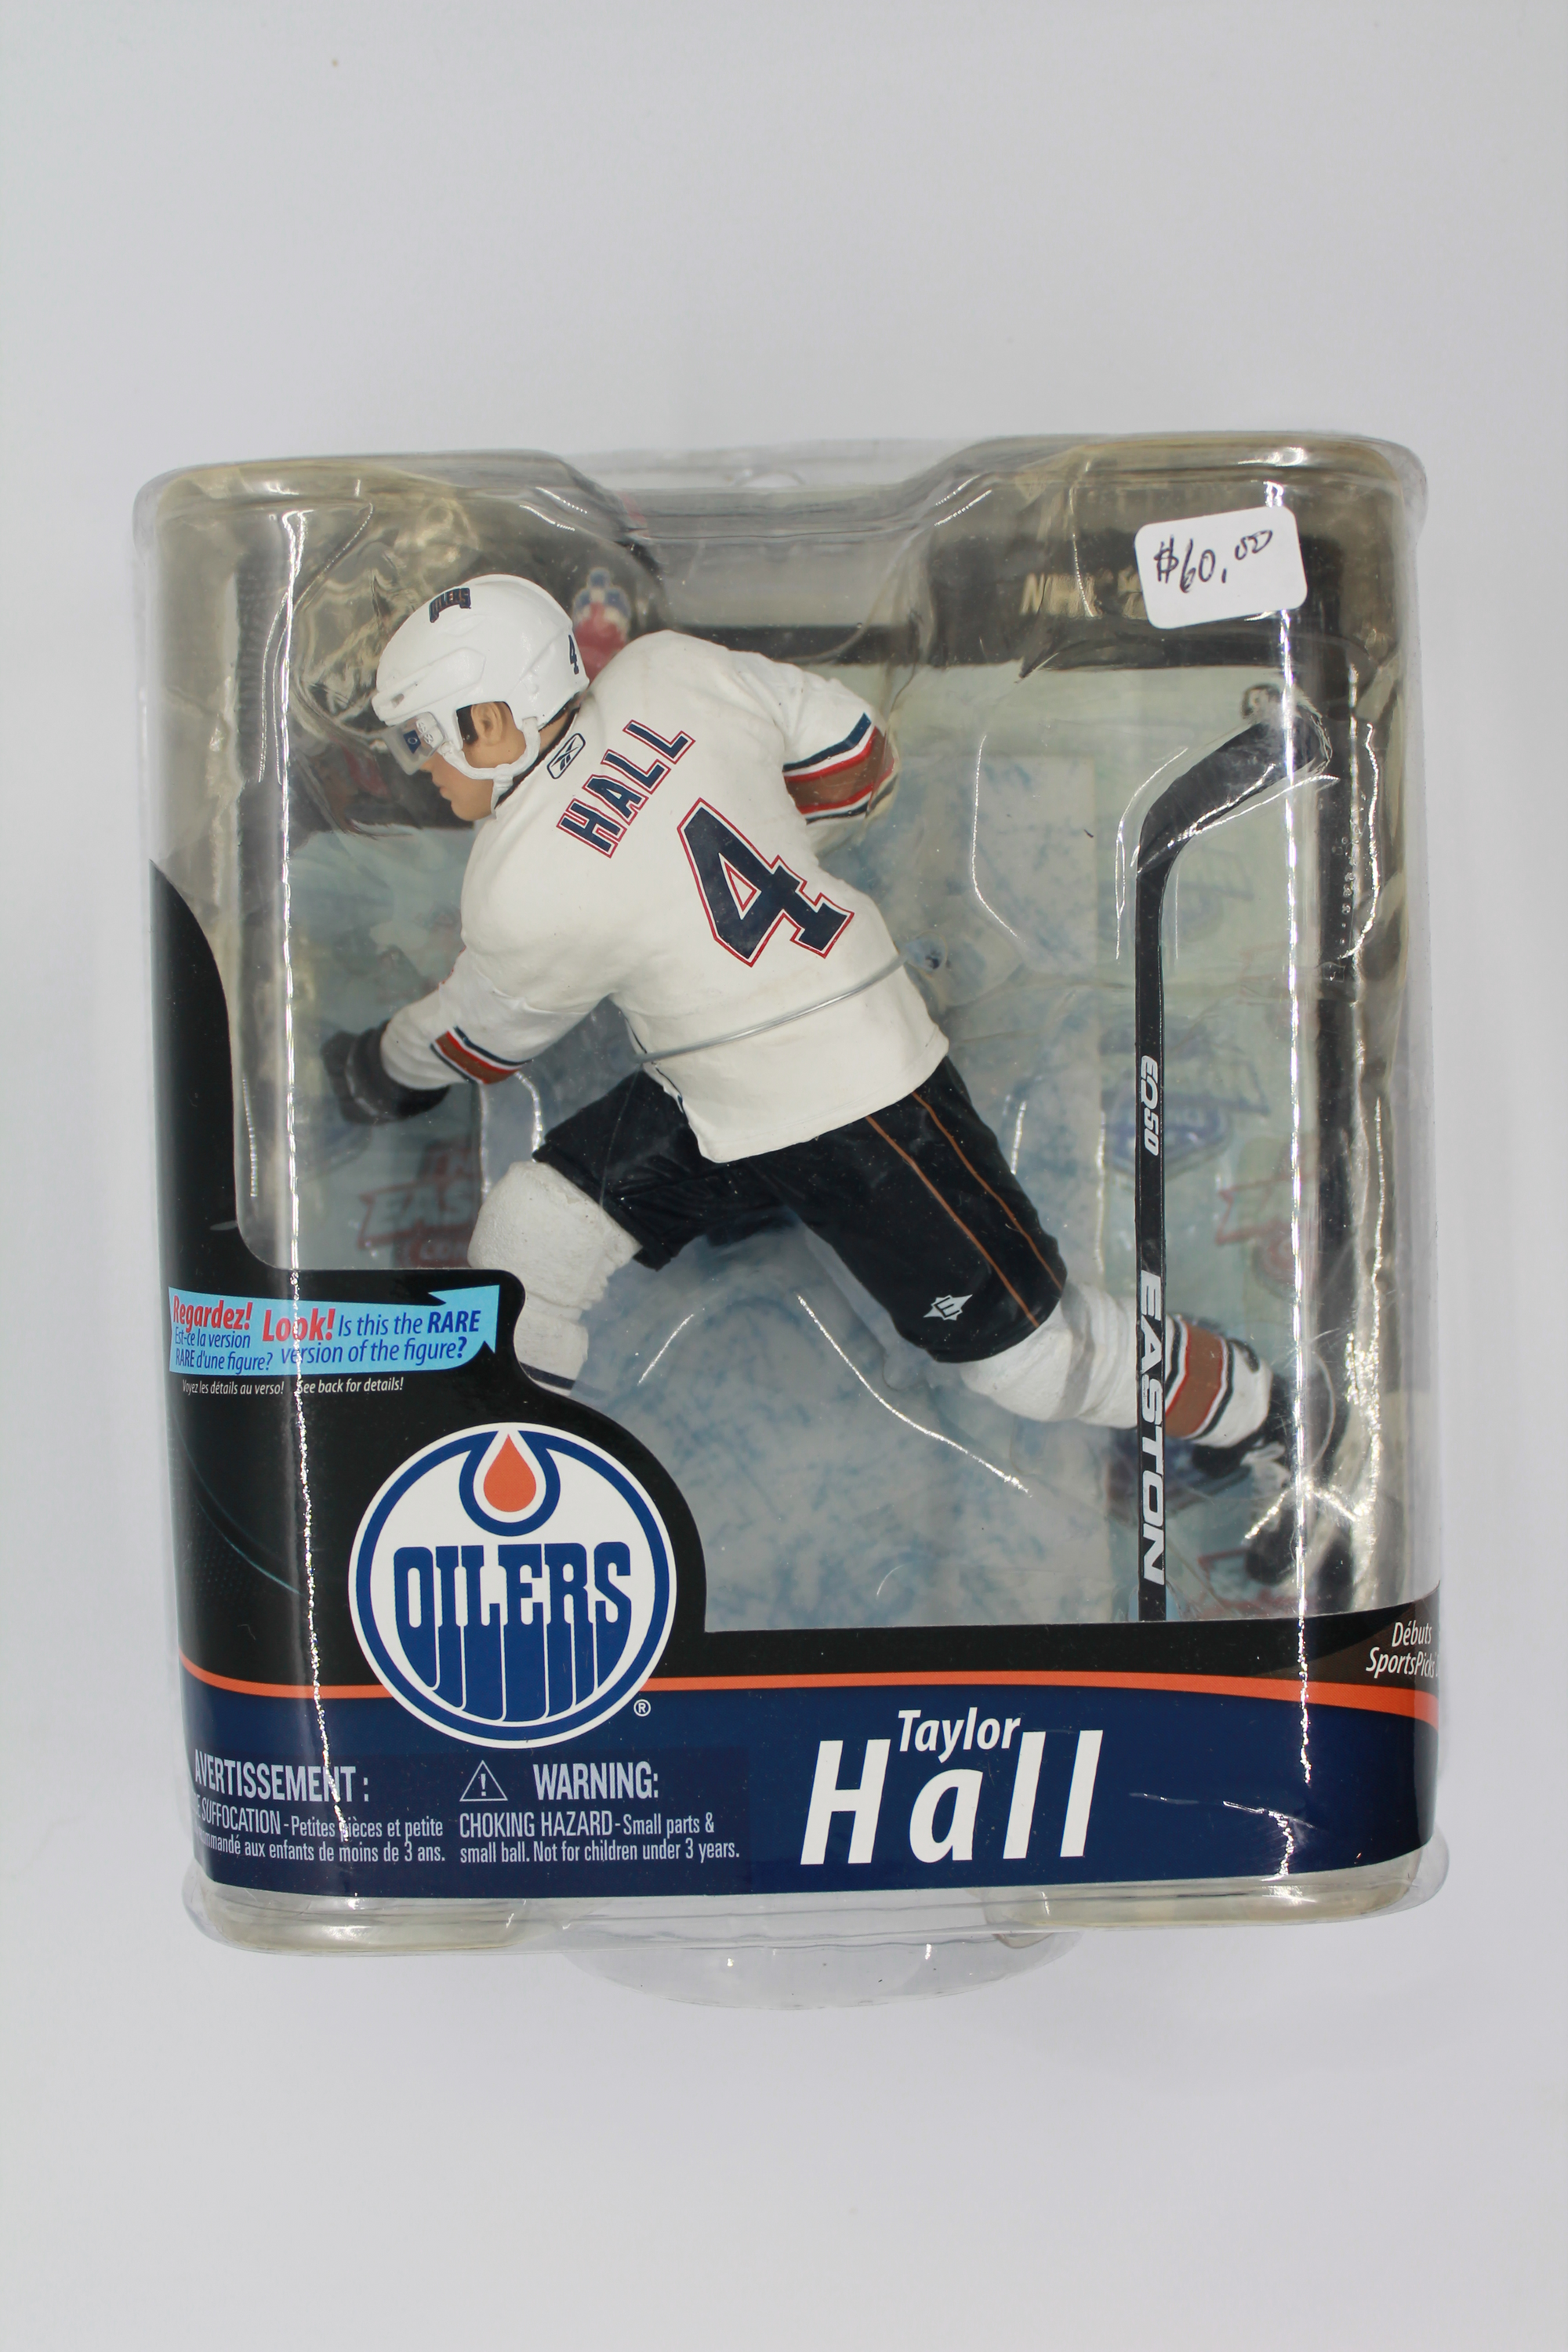 Mcfarlane NHL Figure Silver Collector Variant White Jersey Taylor Hall